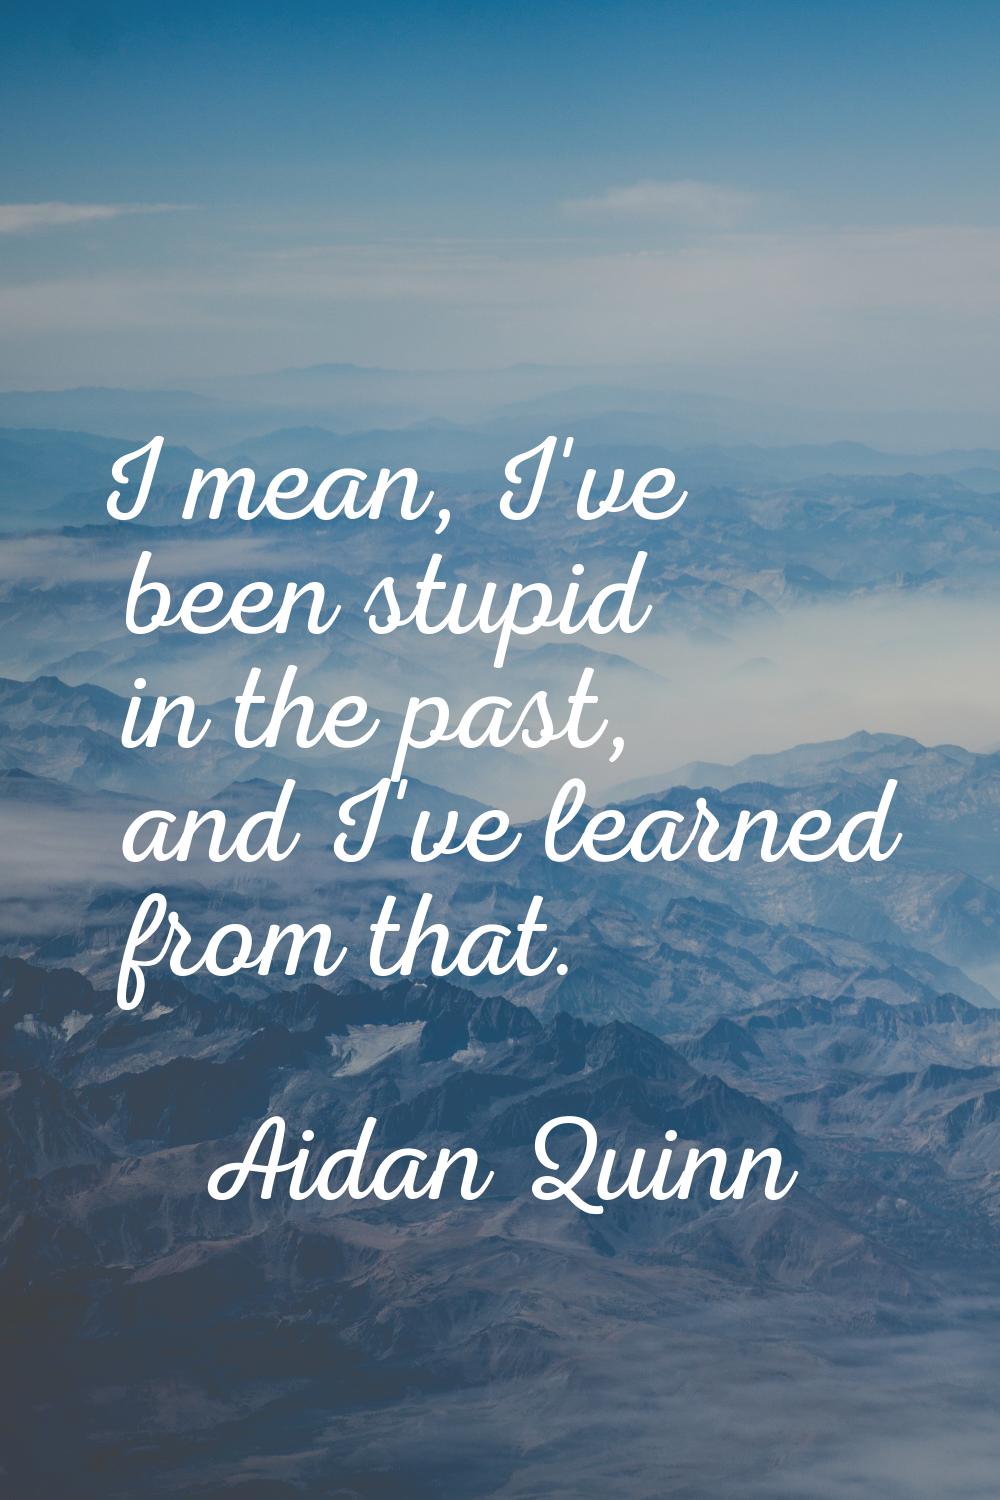 I mean, I've been stupid in the past, and I've learned from that.